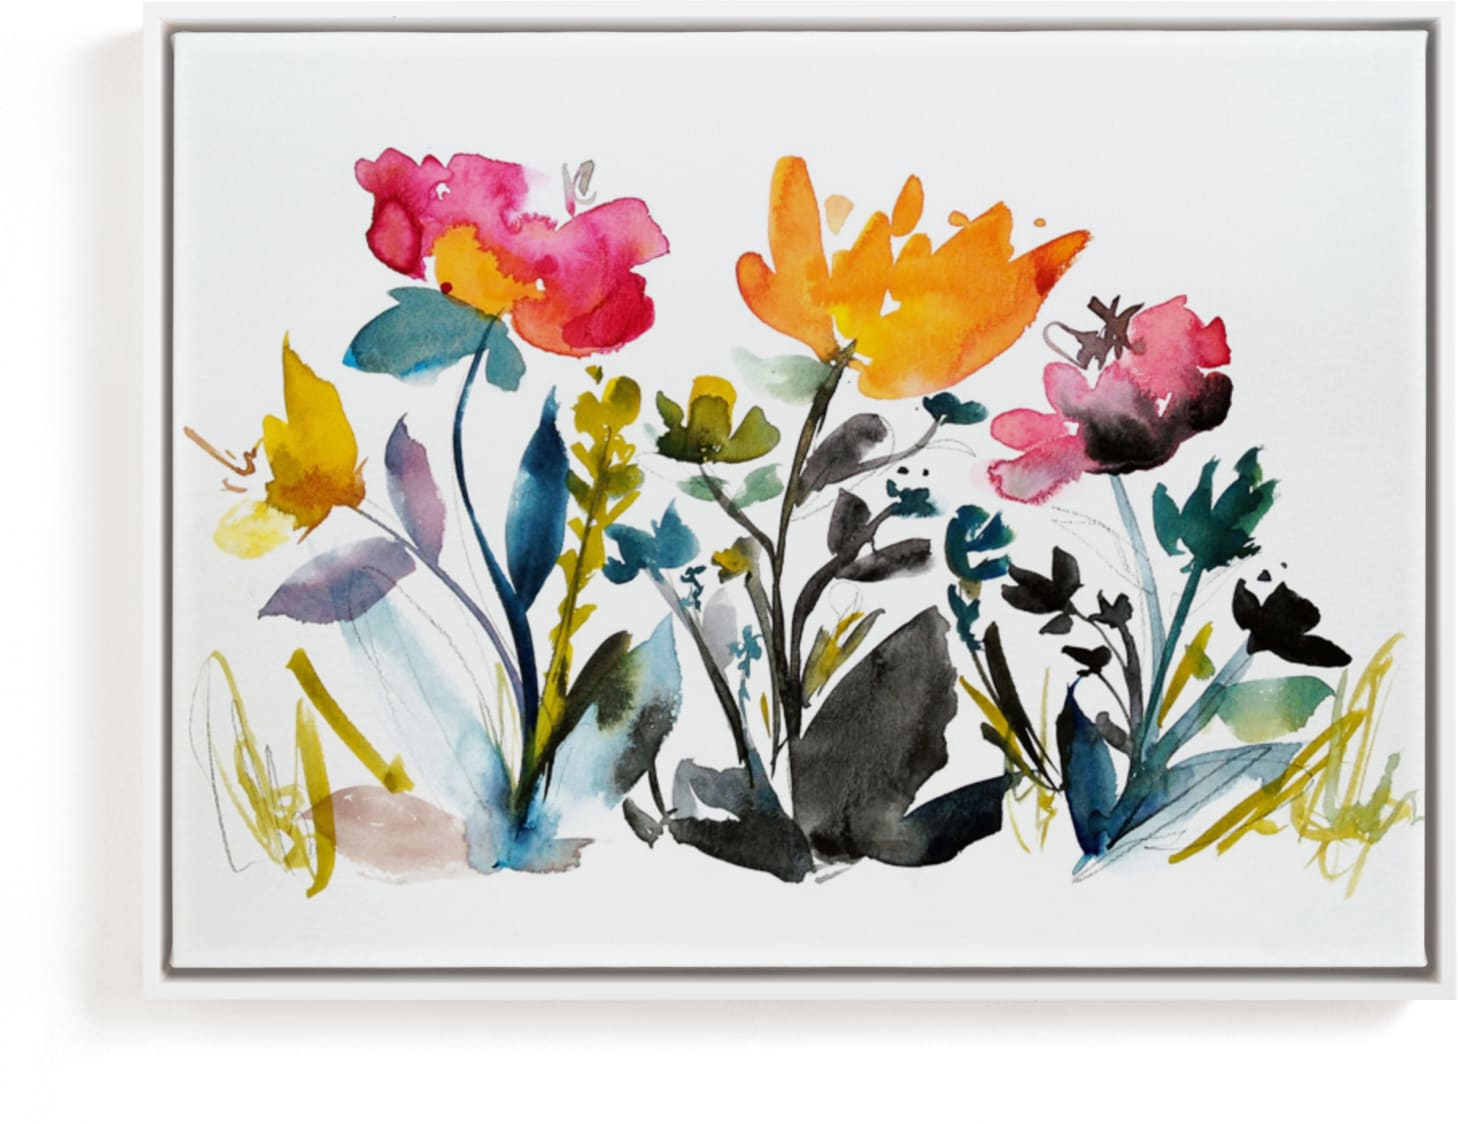 This is a colorful art by Kiana Lee called island wildflowers no.2.